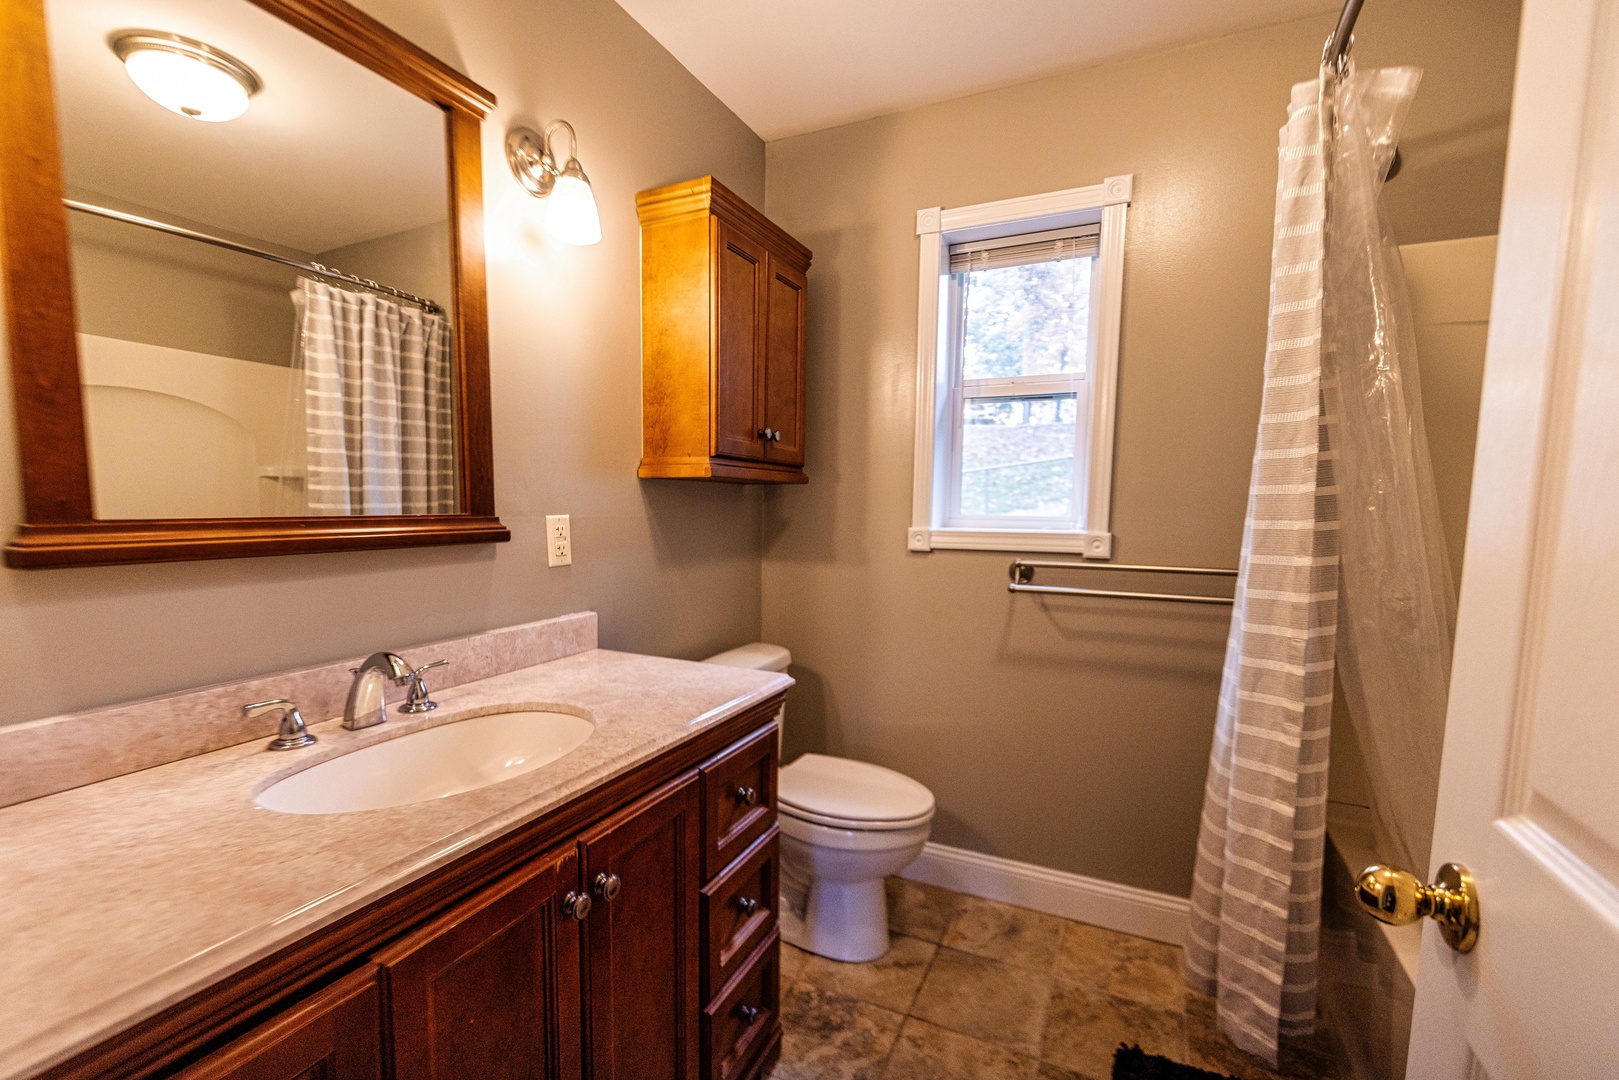 The 1st floor ensuite bath offers a single vanity & shower/tub combo